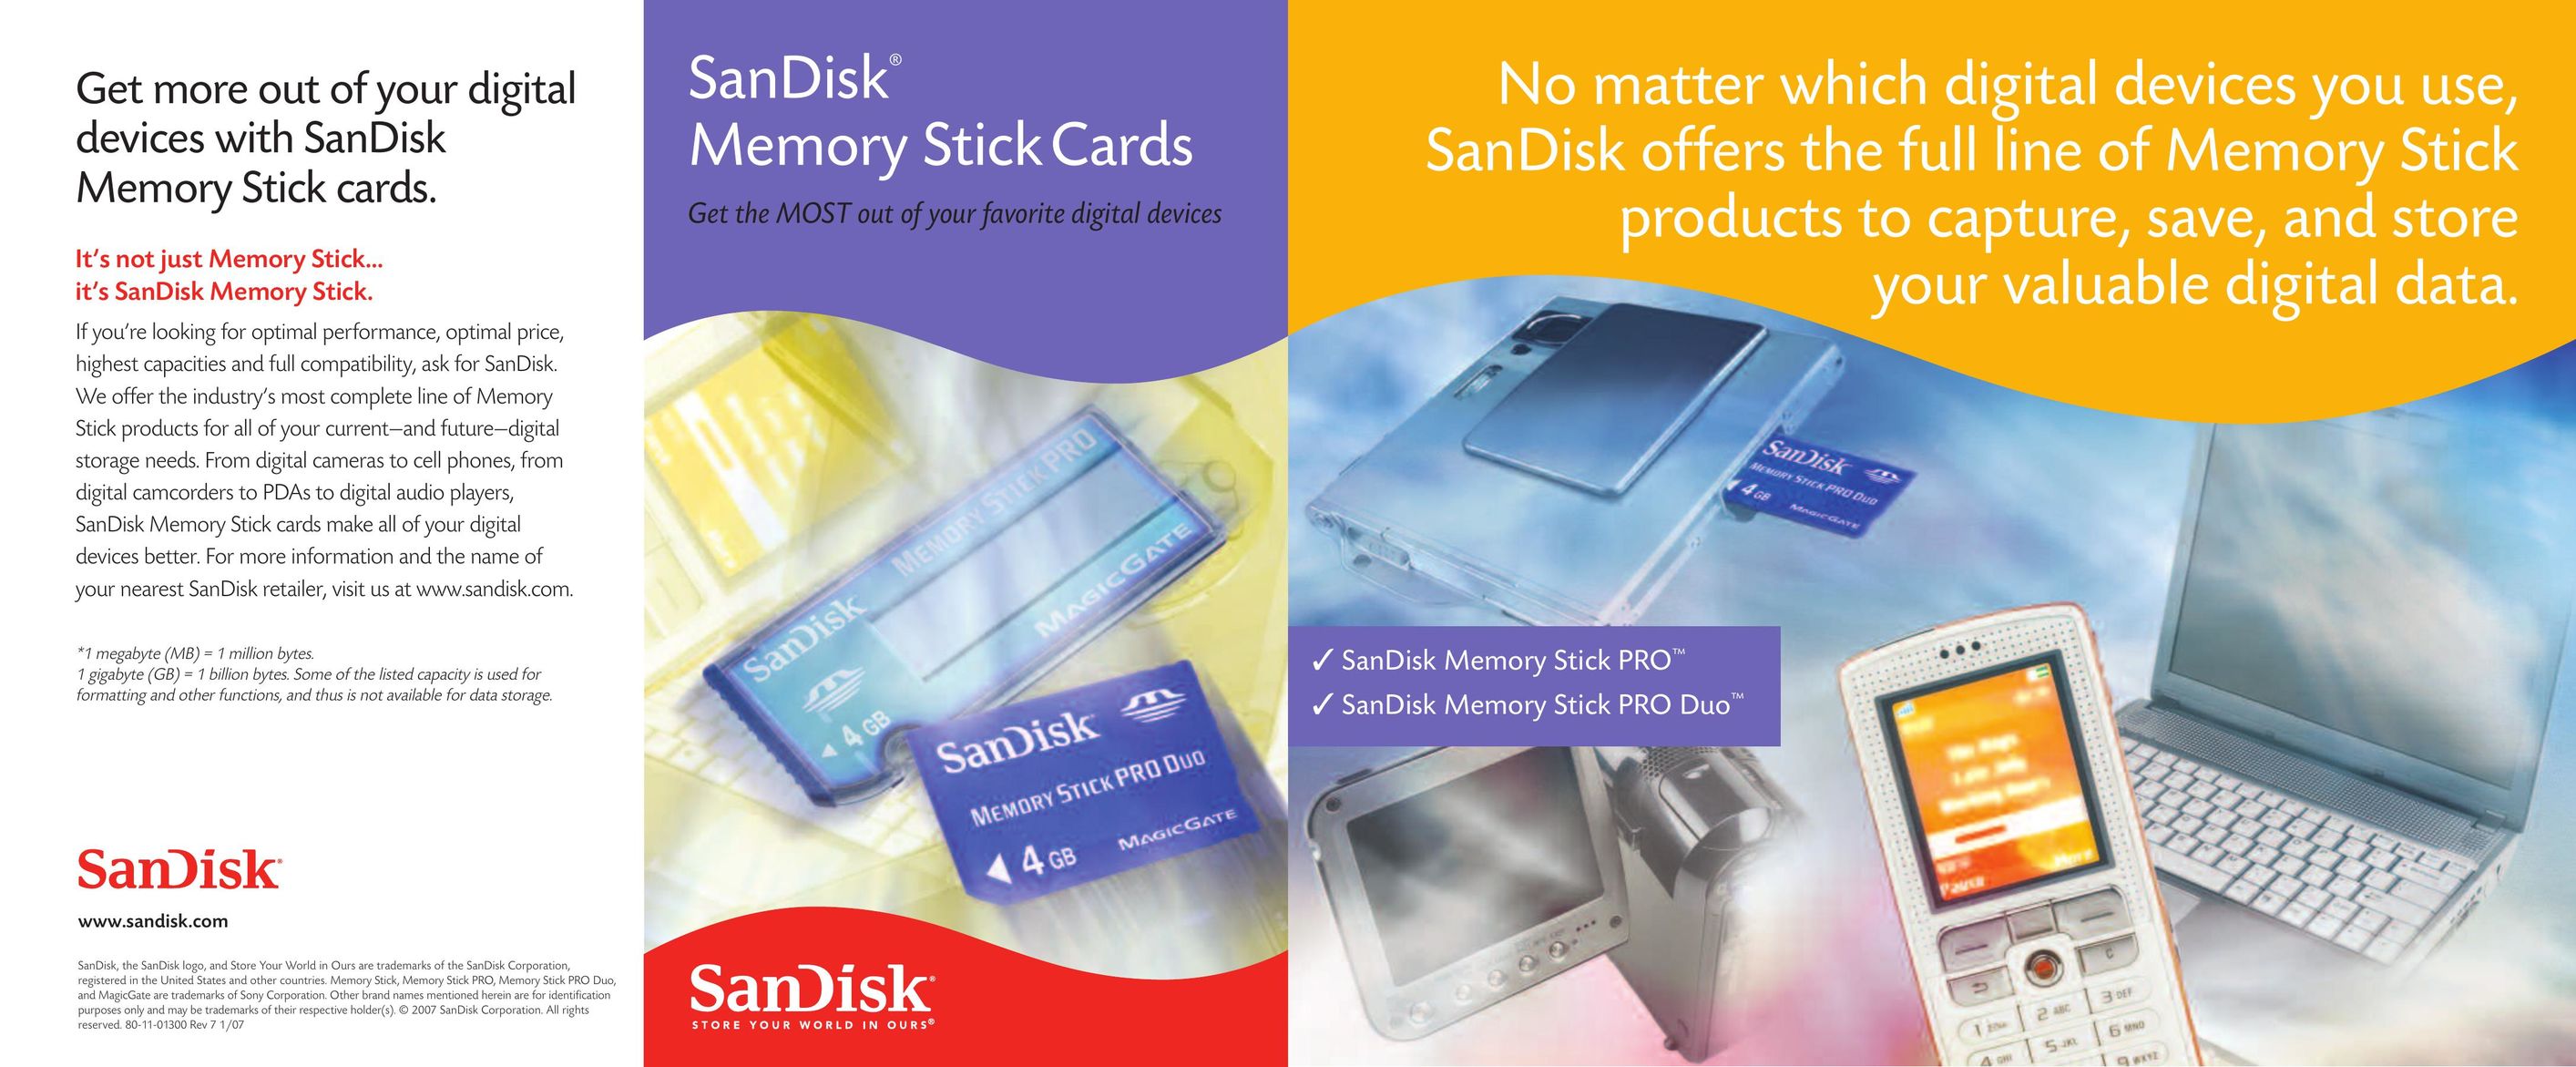 SanDisk 80-11-01300 Cell Phone Accessories User Manual